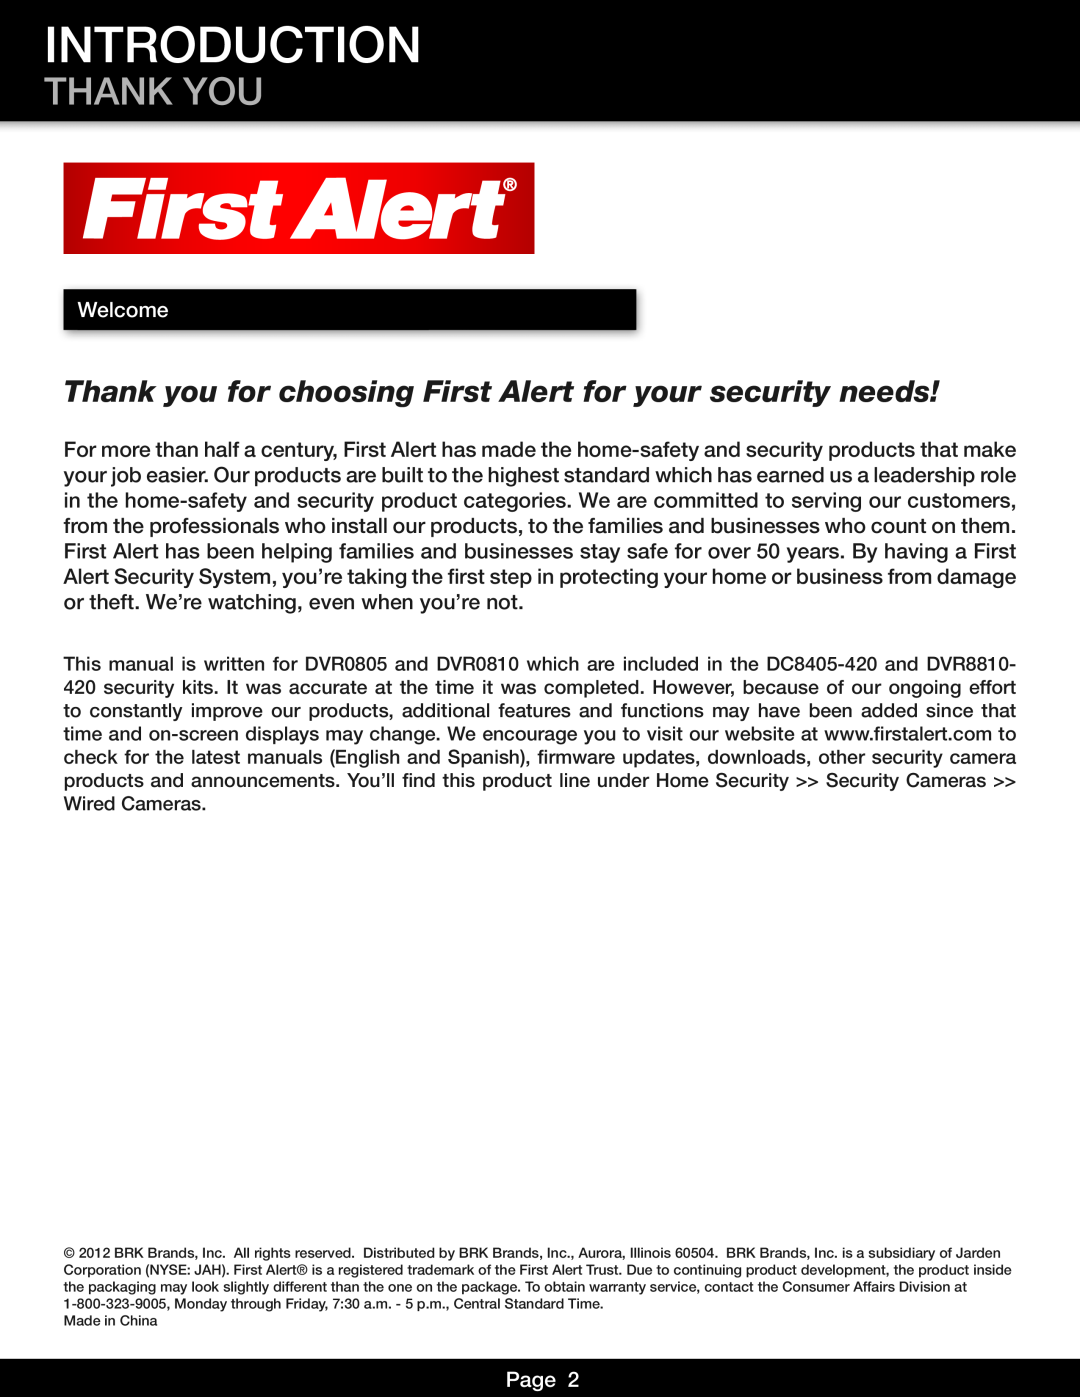 First Alert DVR0805 Introduction, Thank You, Thank you for choosing First Alert for your security needs, Welcome, Page 